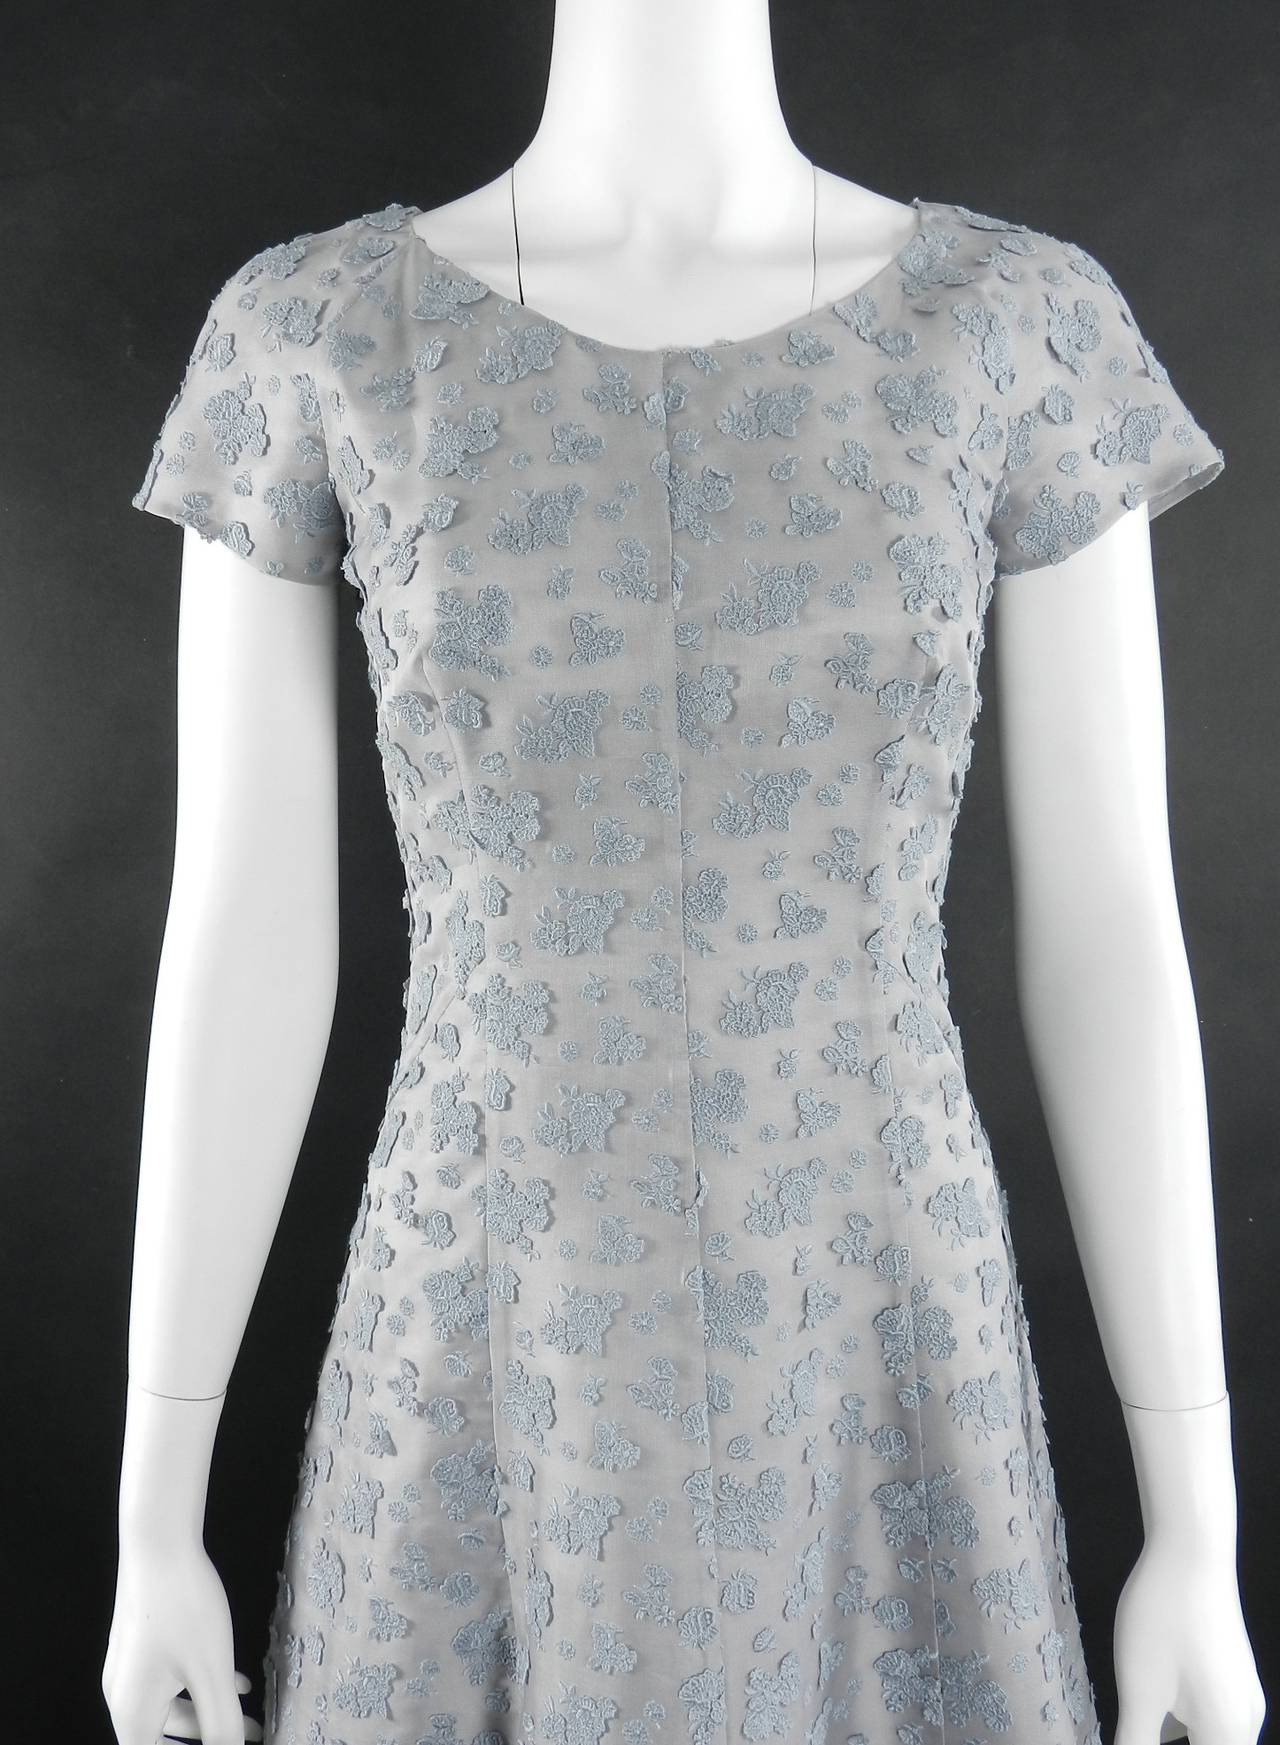 Prada light periwinkle blue sheer overlay embroidered dress.  Excellent condition - worn only once. Tagged size IT 40 (USA 4). To fit 33 / 34